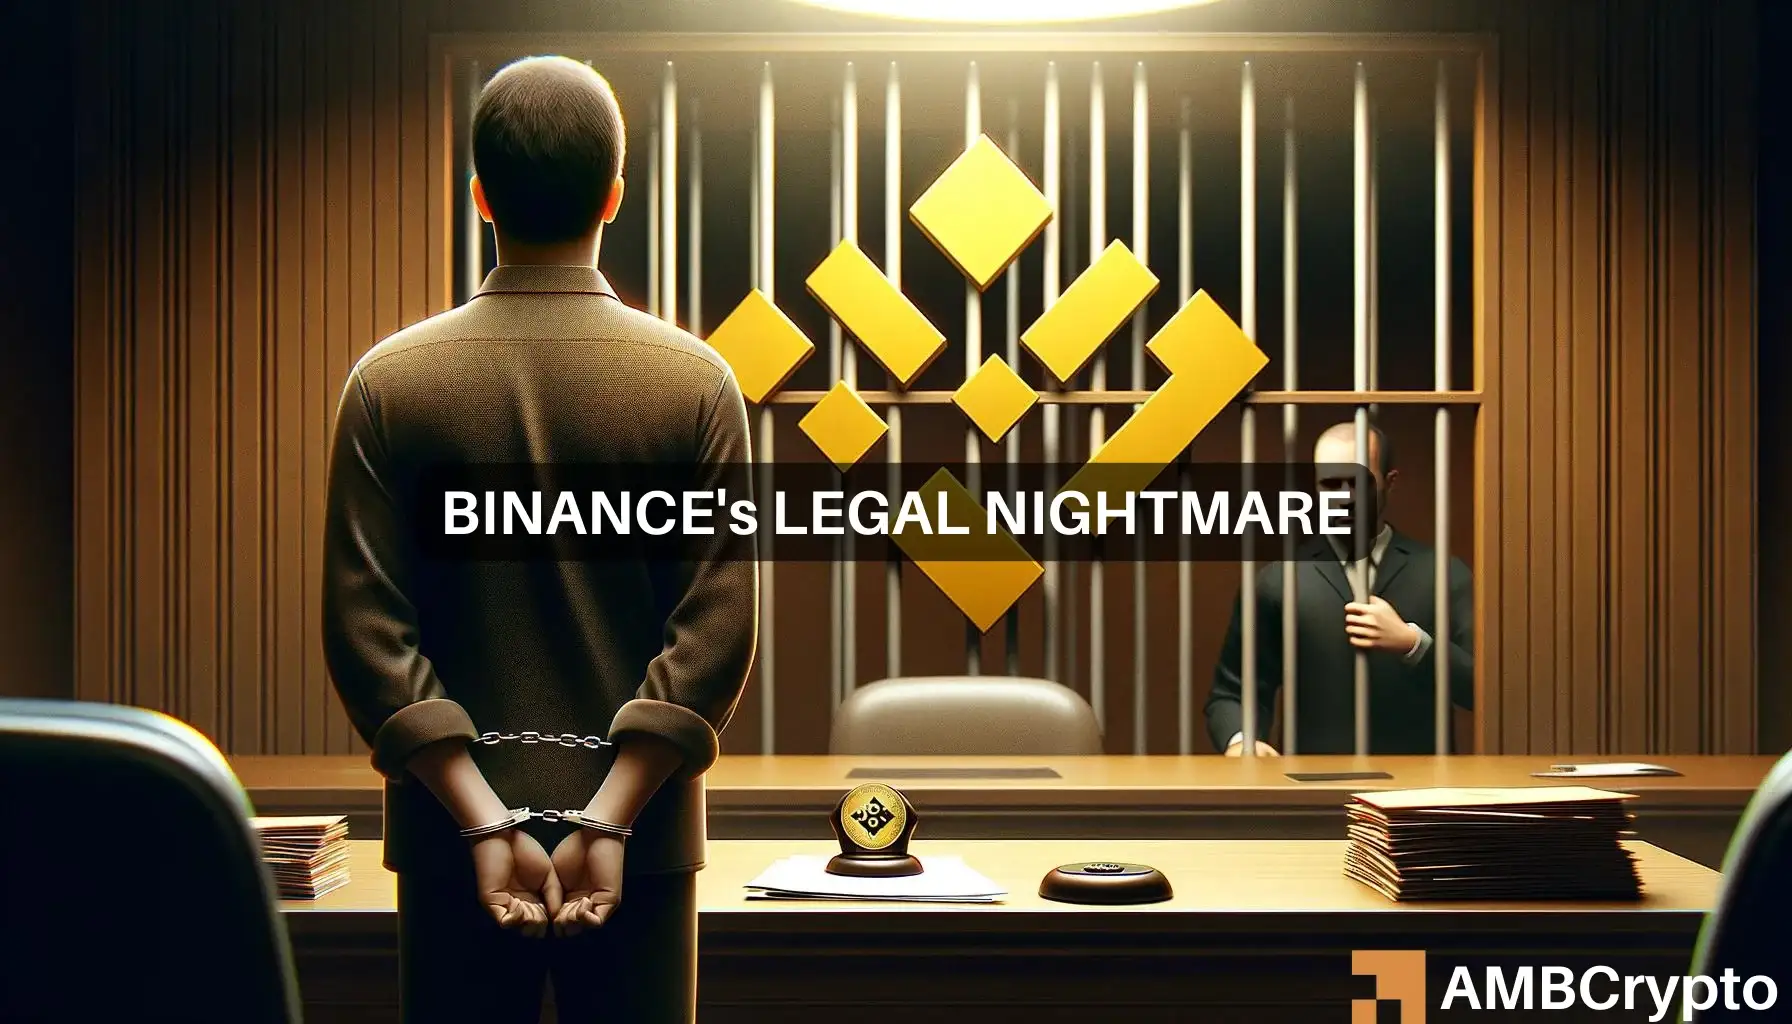 Binance founder CZ says ‘no excuse for actions’ as he faces 3-year sentence